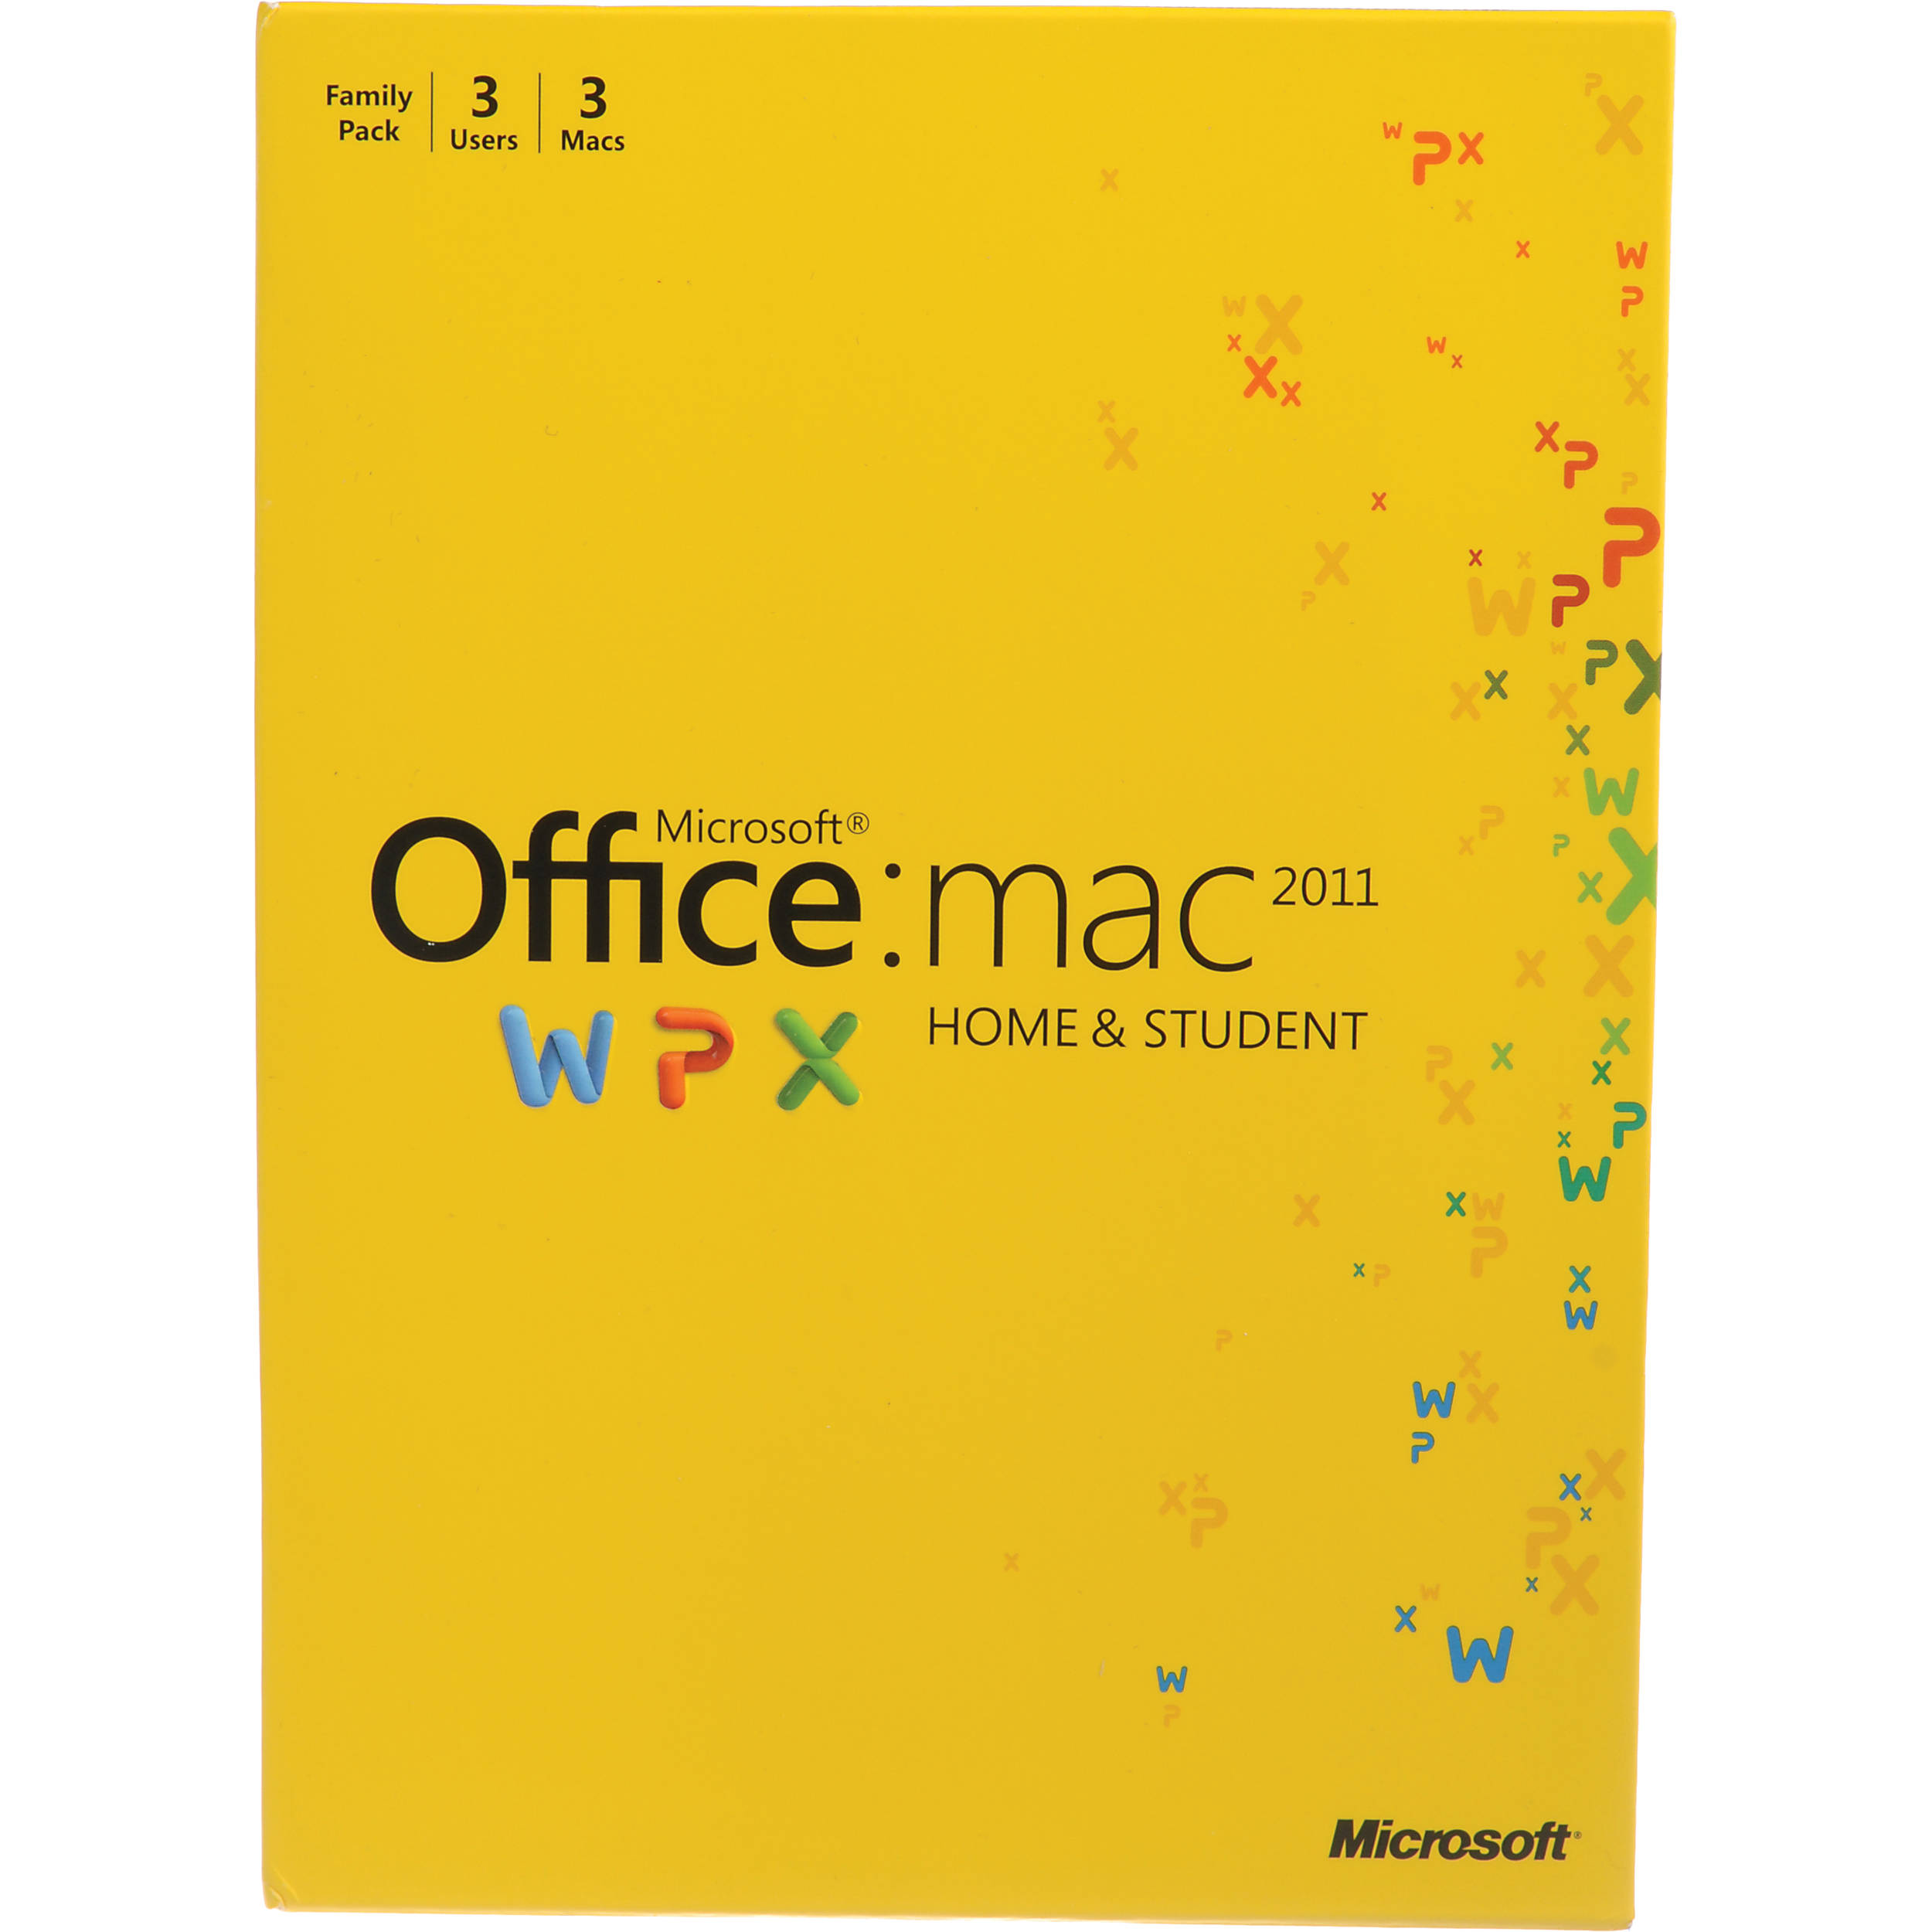 MS Office 2011 Home and Student price